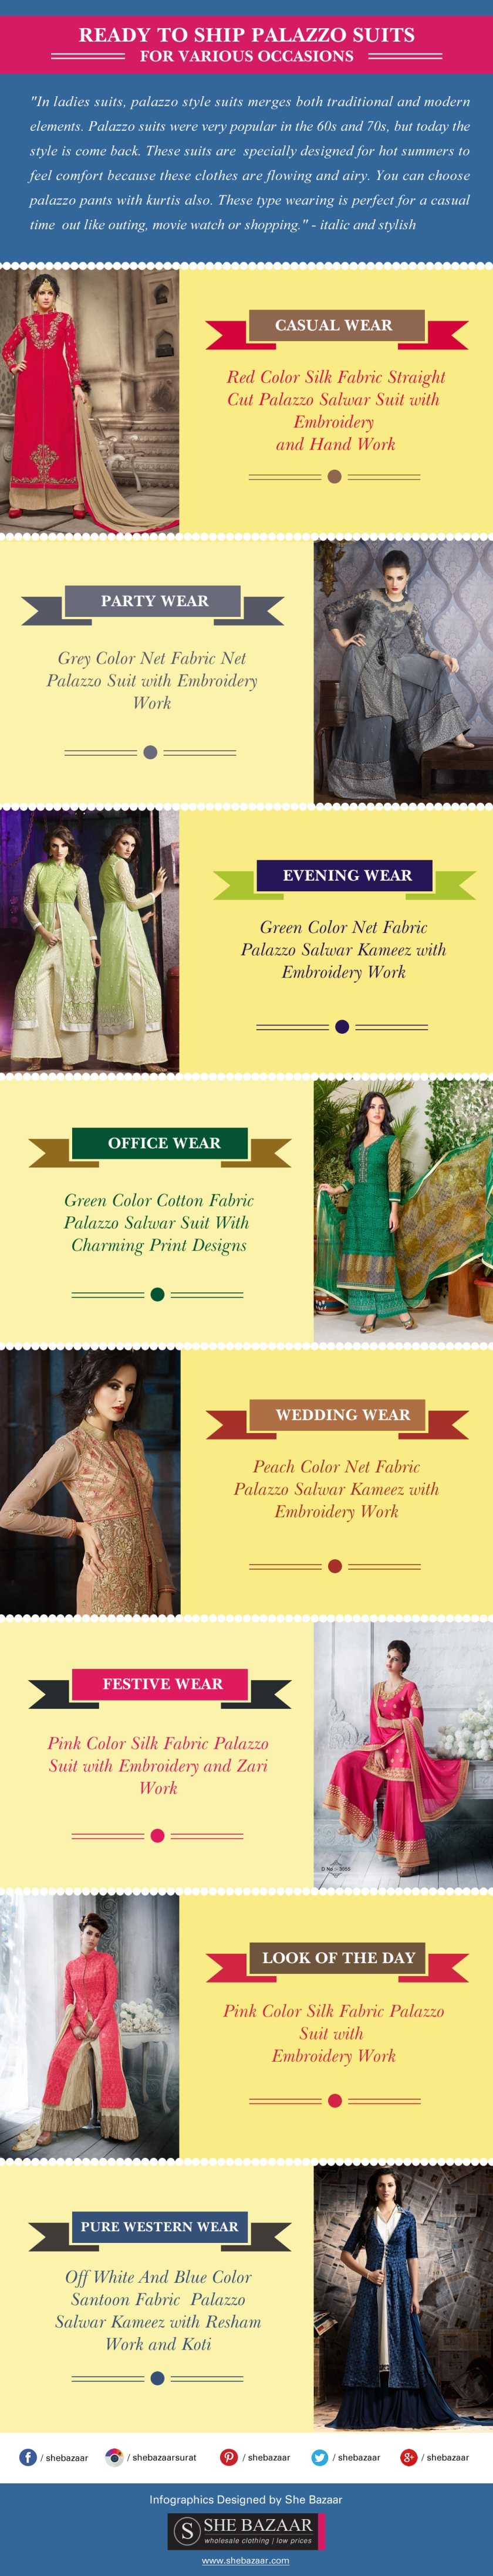 Ready to ship palazzo suits for various occasions